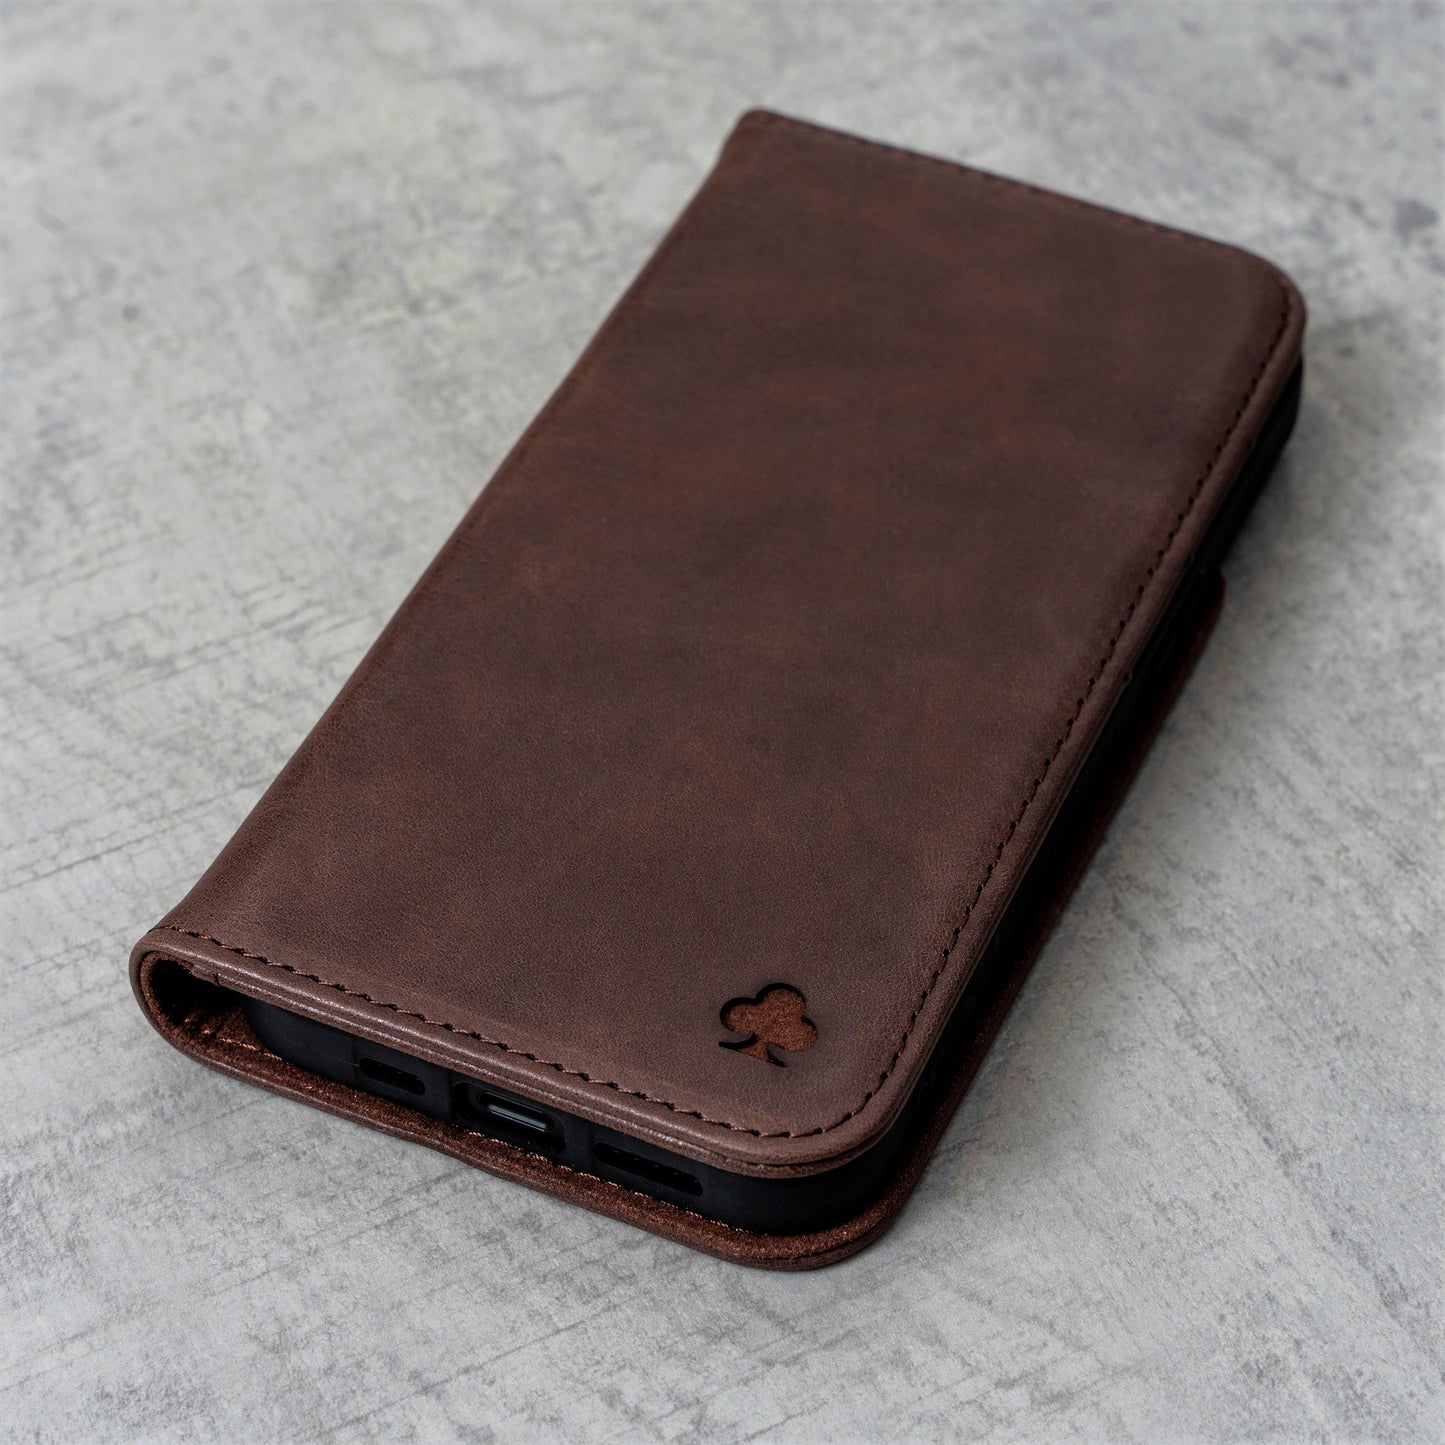 Samsung Galaxy S21 Ultra Leather Case. Premium Slim Genuine Leather Stand Case/Cover/Wallet (Chocolate Brown)